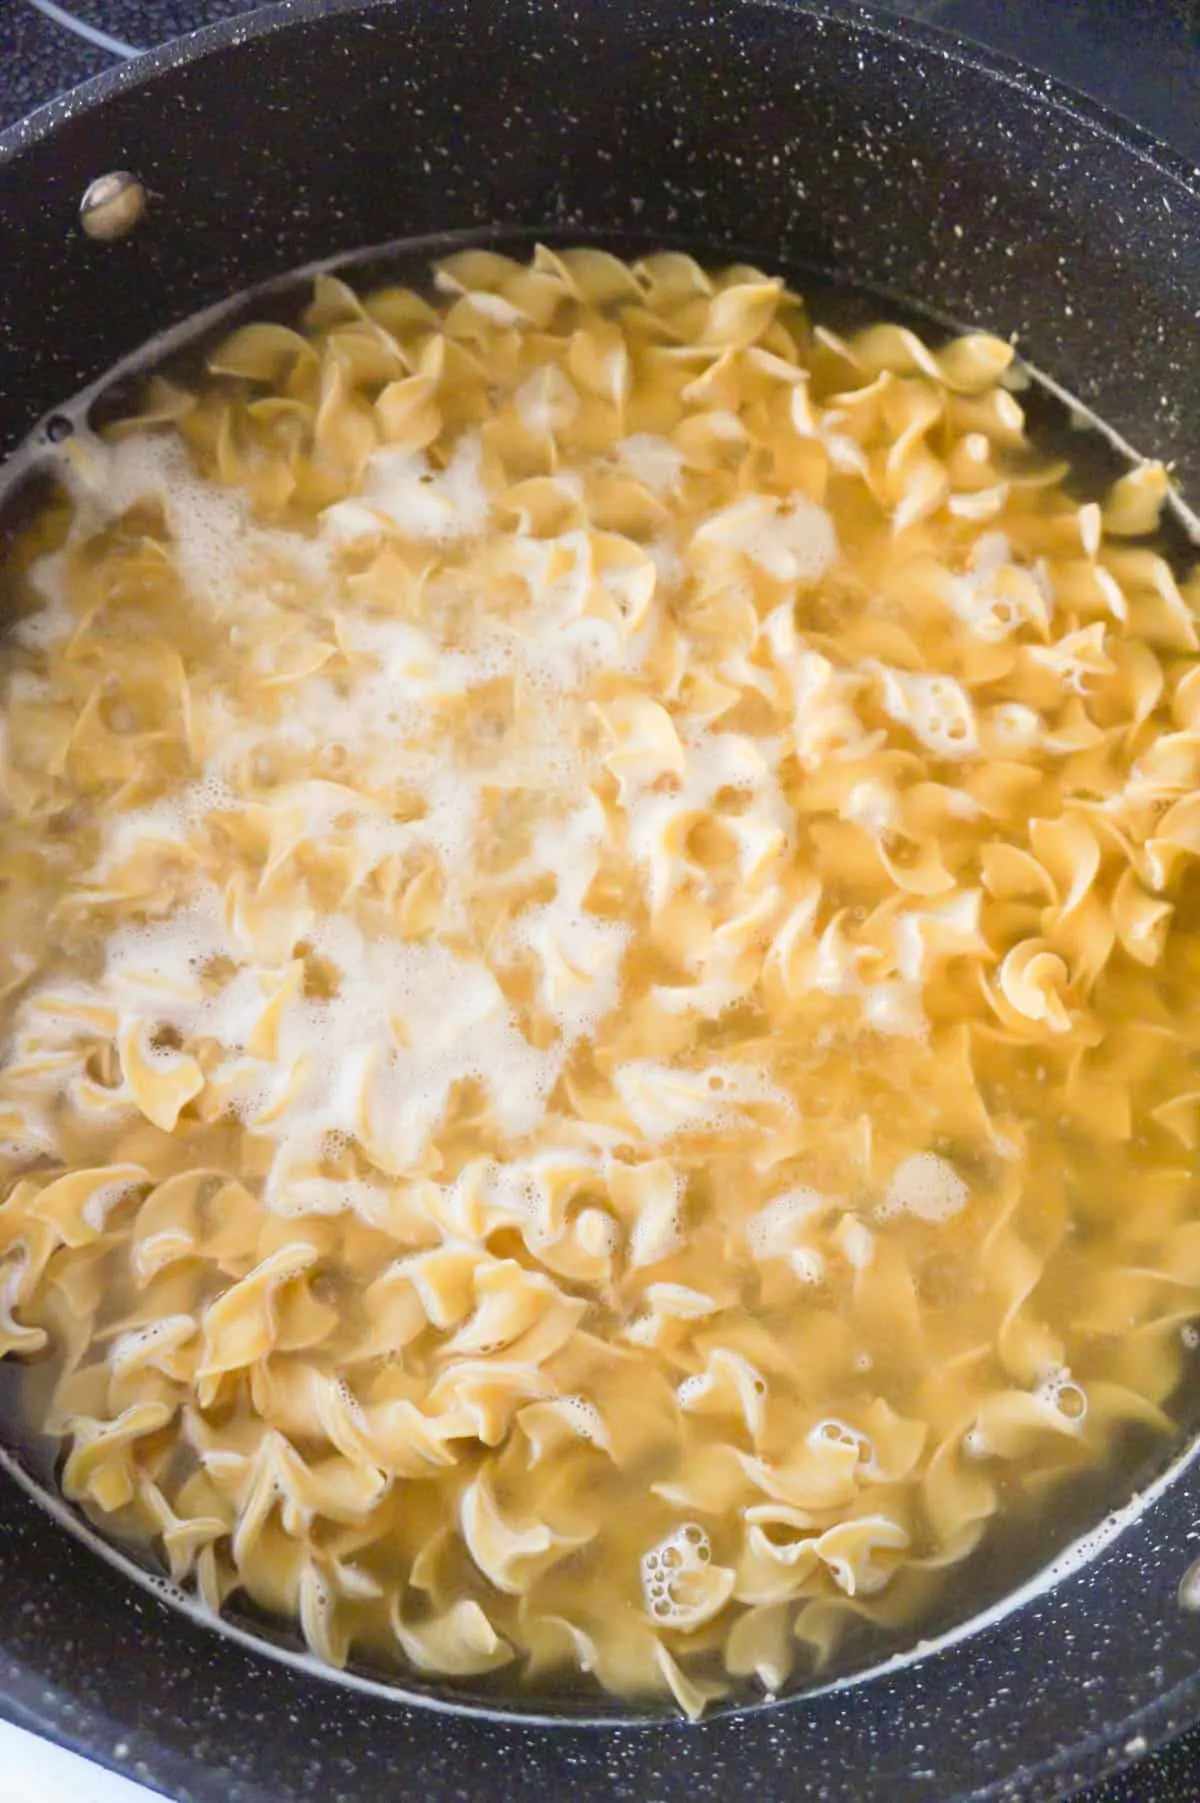 uncooked egg noodles in chicken broth in a pot